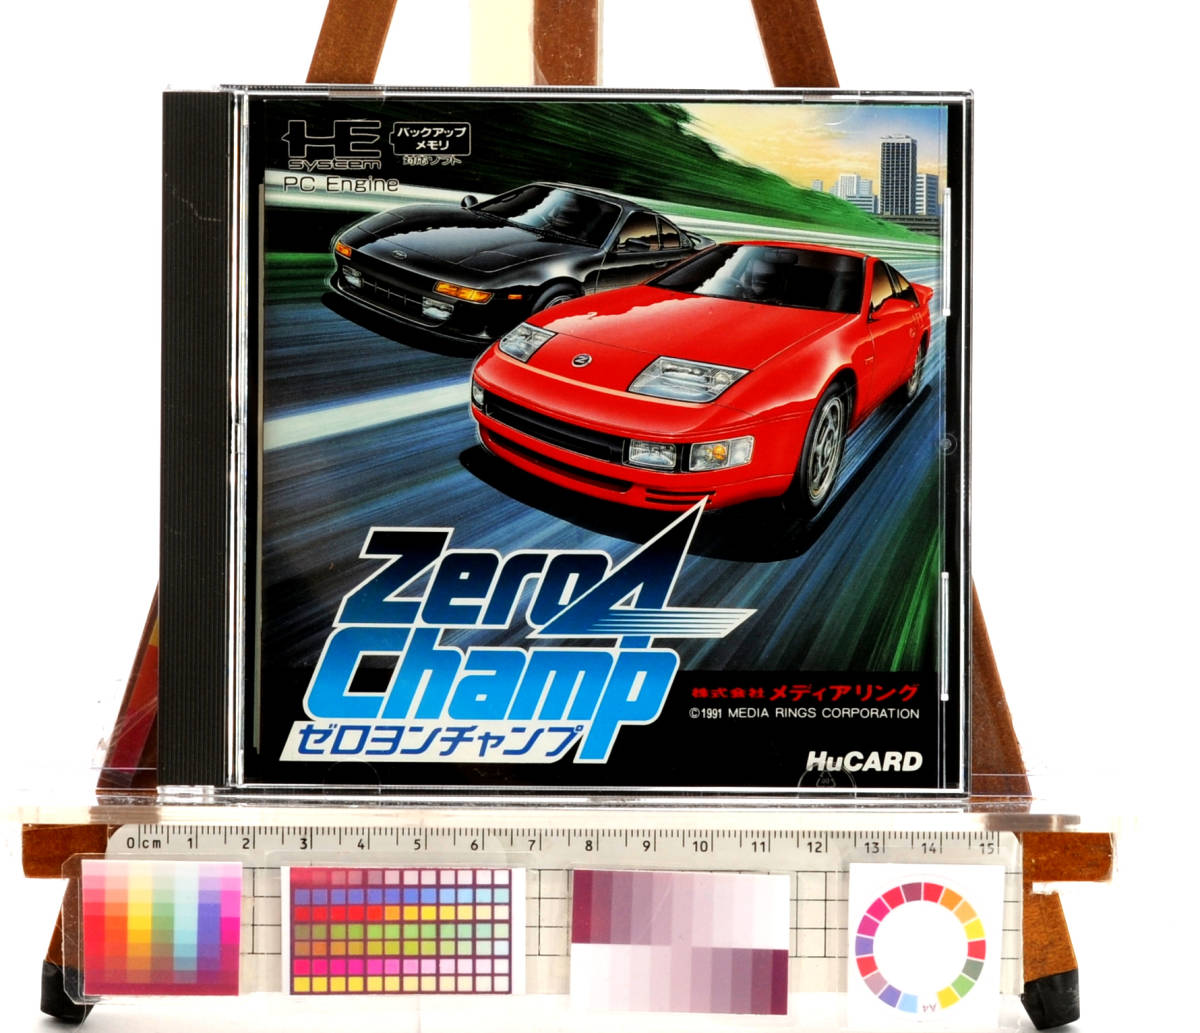 [Delivery Free]1990s- Game Software NEC PC-Engine Zero4 Champ ゼロヨンチャンプ[tagゲーム]_画像1